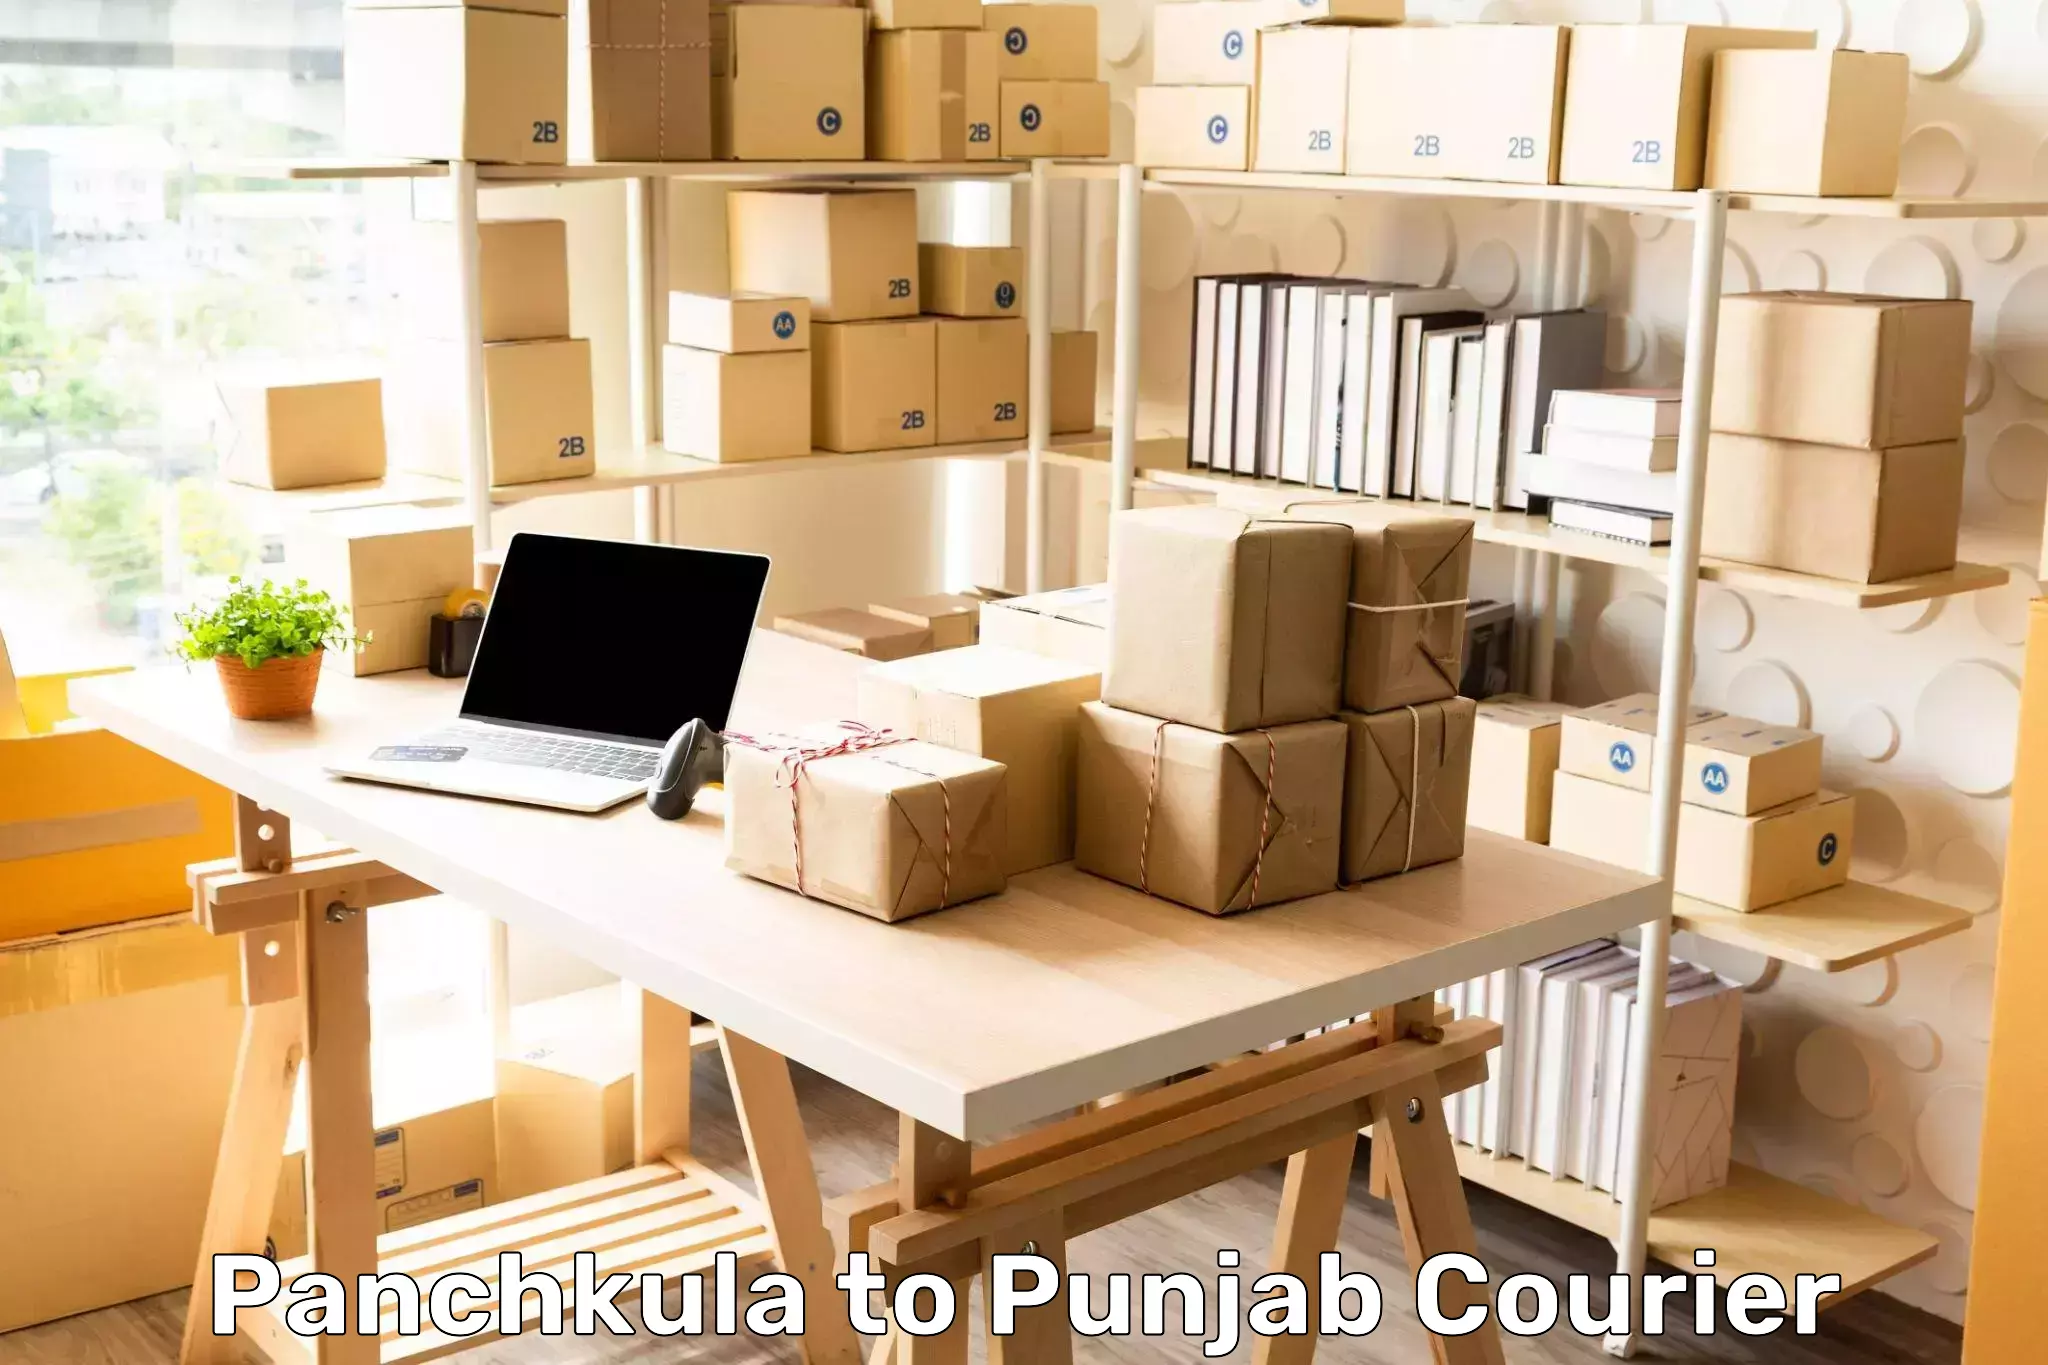 Bulk courier orders in Panchkula to Mohali